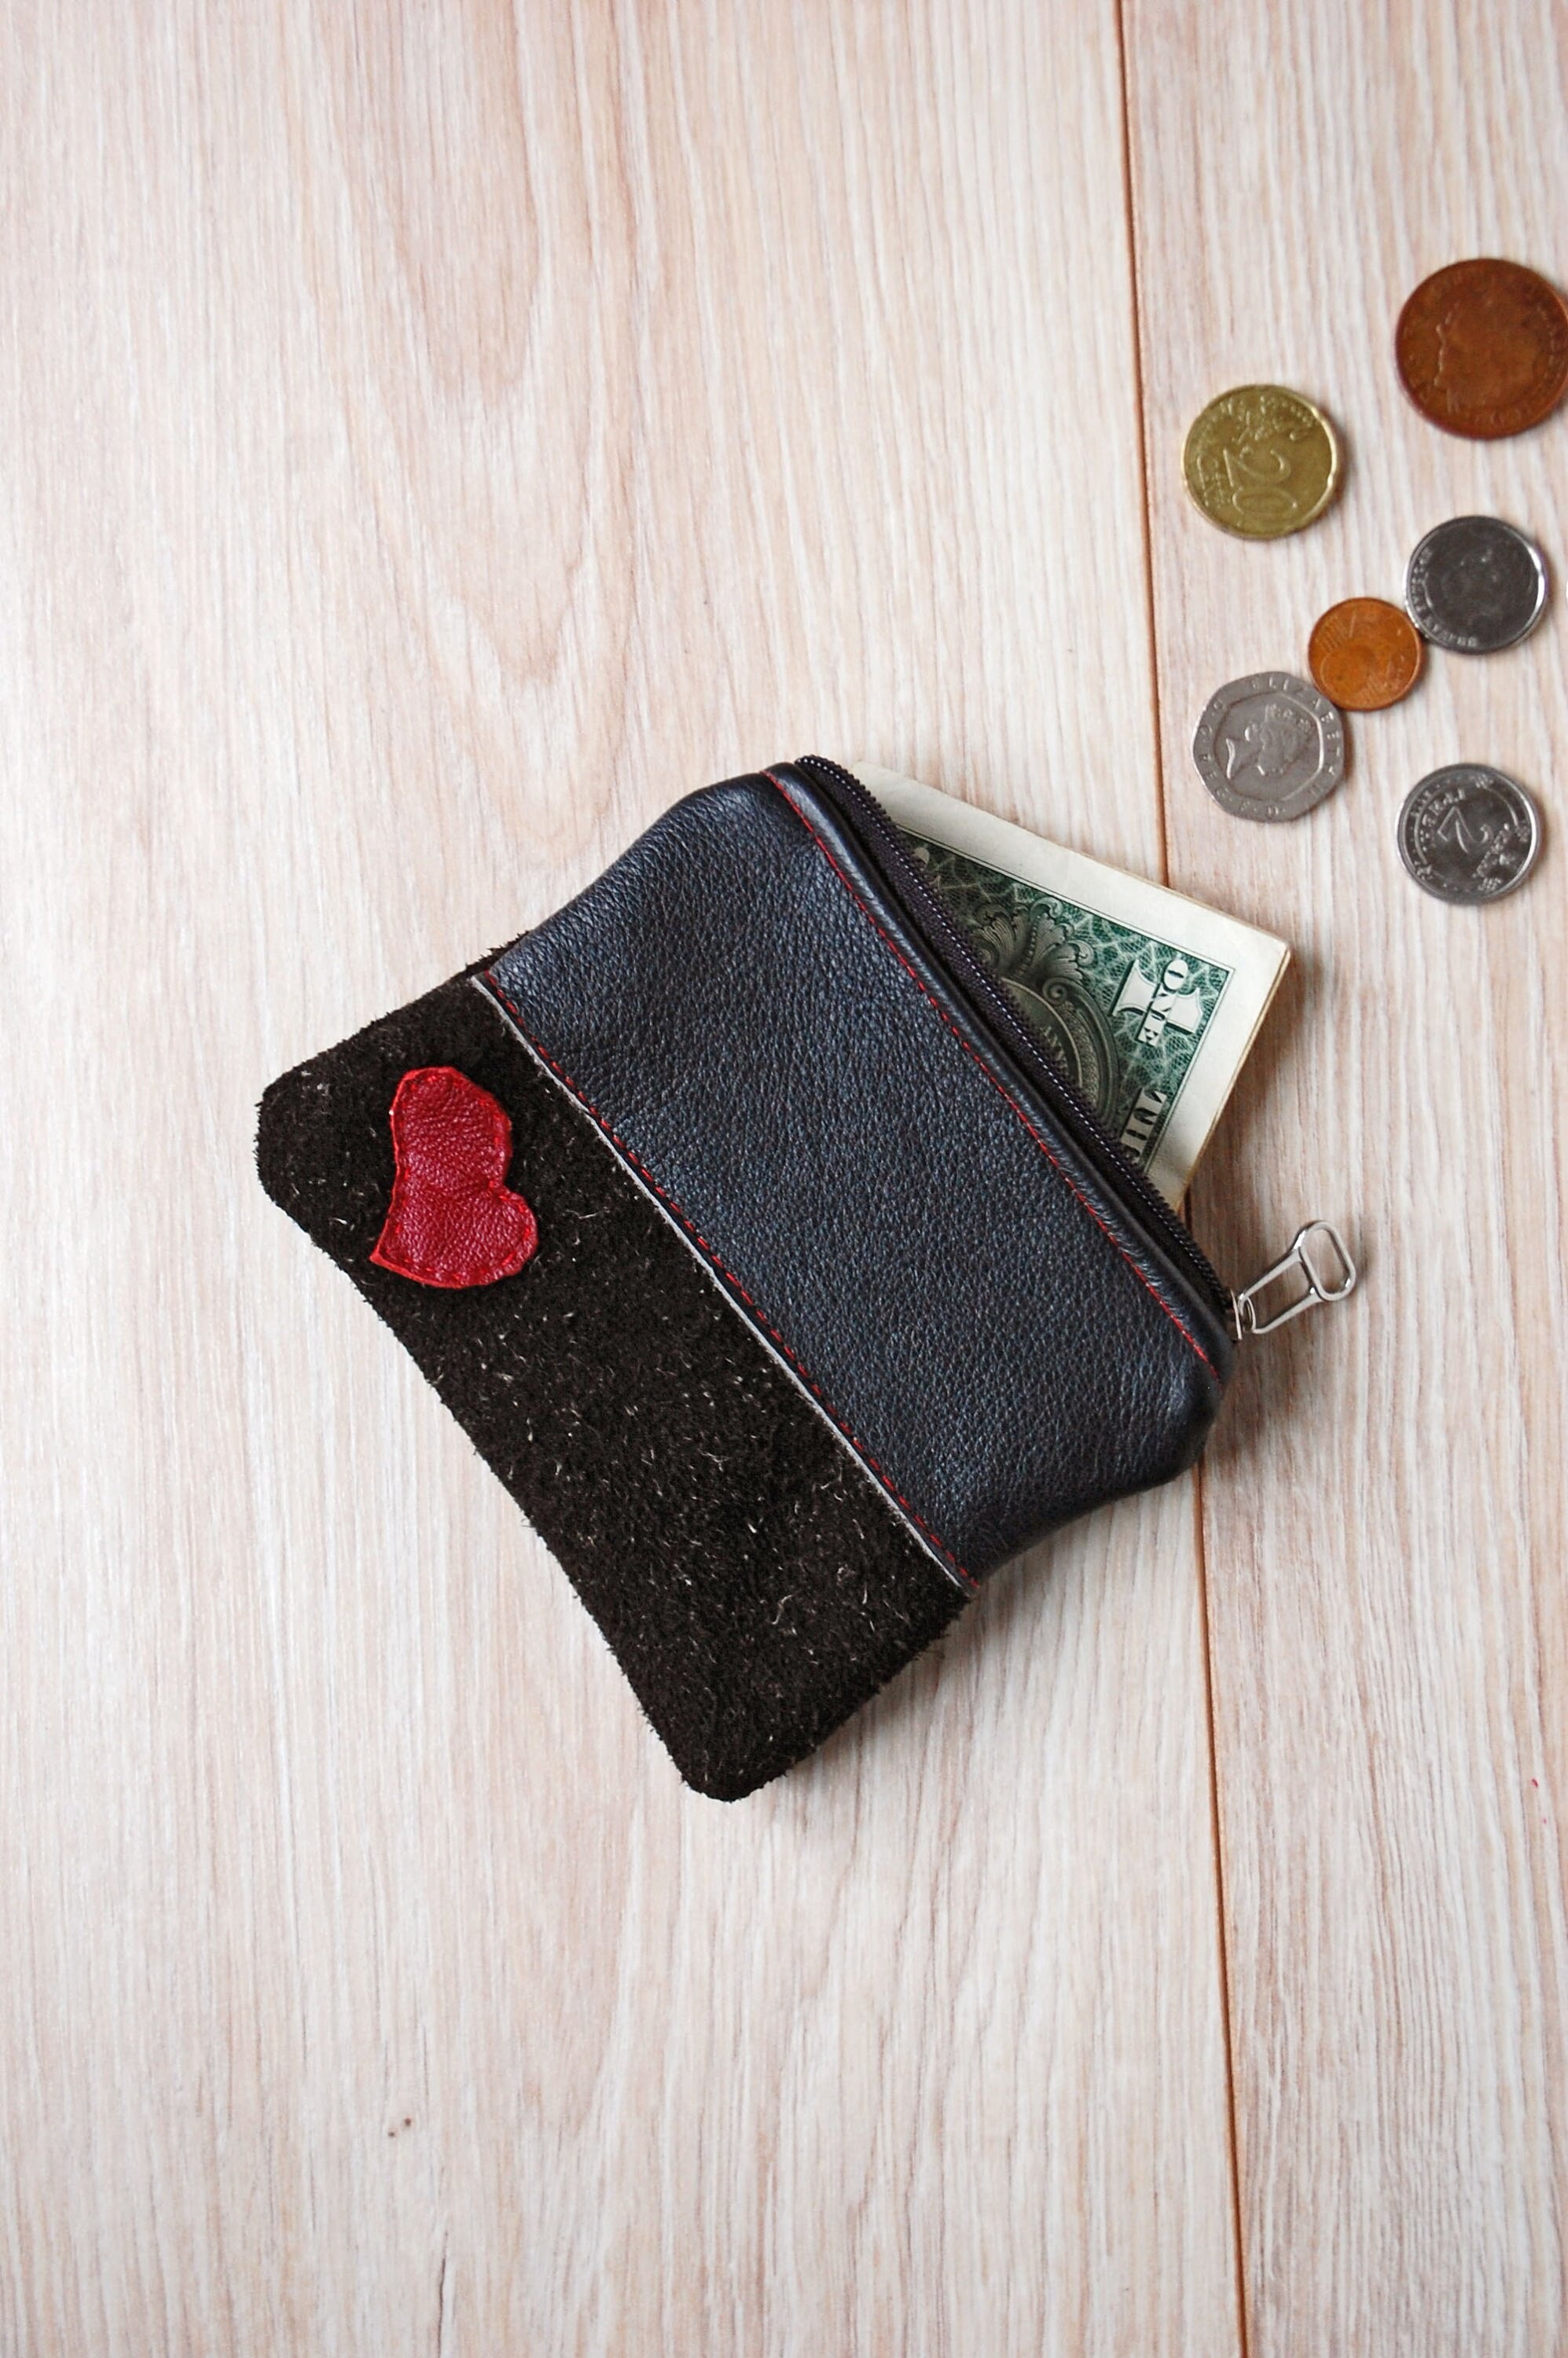  BESTOYARD Leather Coin Purse Change Holder Heart Shaped Coin Bag  Change Pouch with Zipper Coin Pouch Change Wallet Handbag Pendant Charms  for Party Favor Stocking Stuffers : Clothing, Shoes & Jewelry